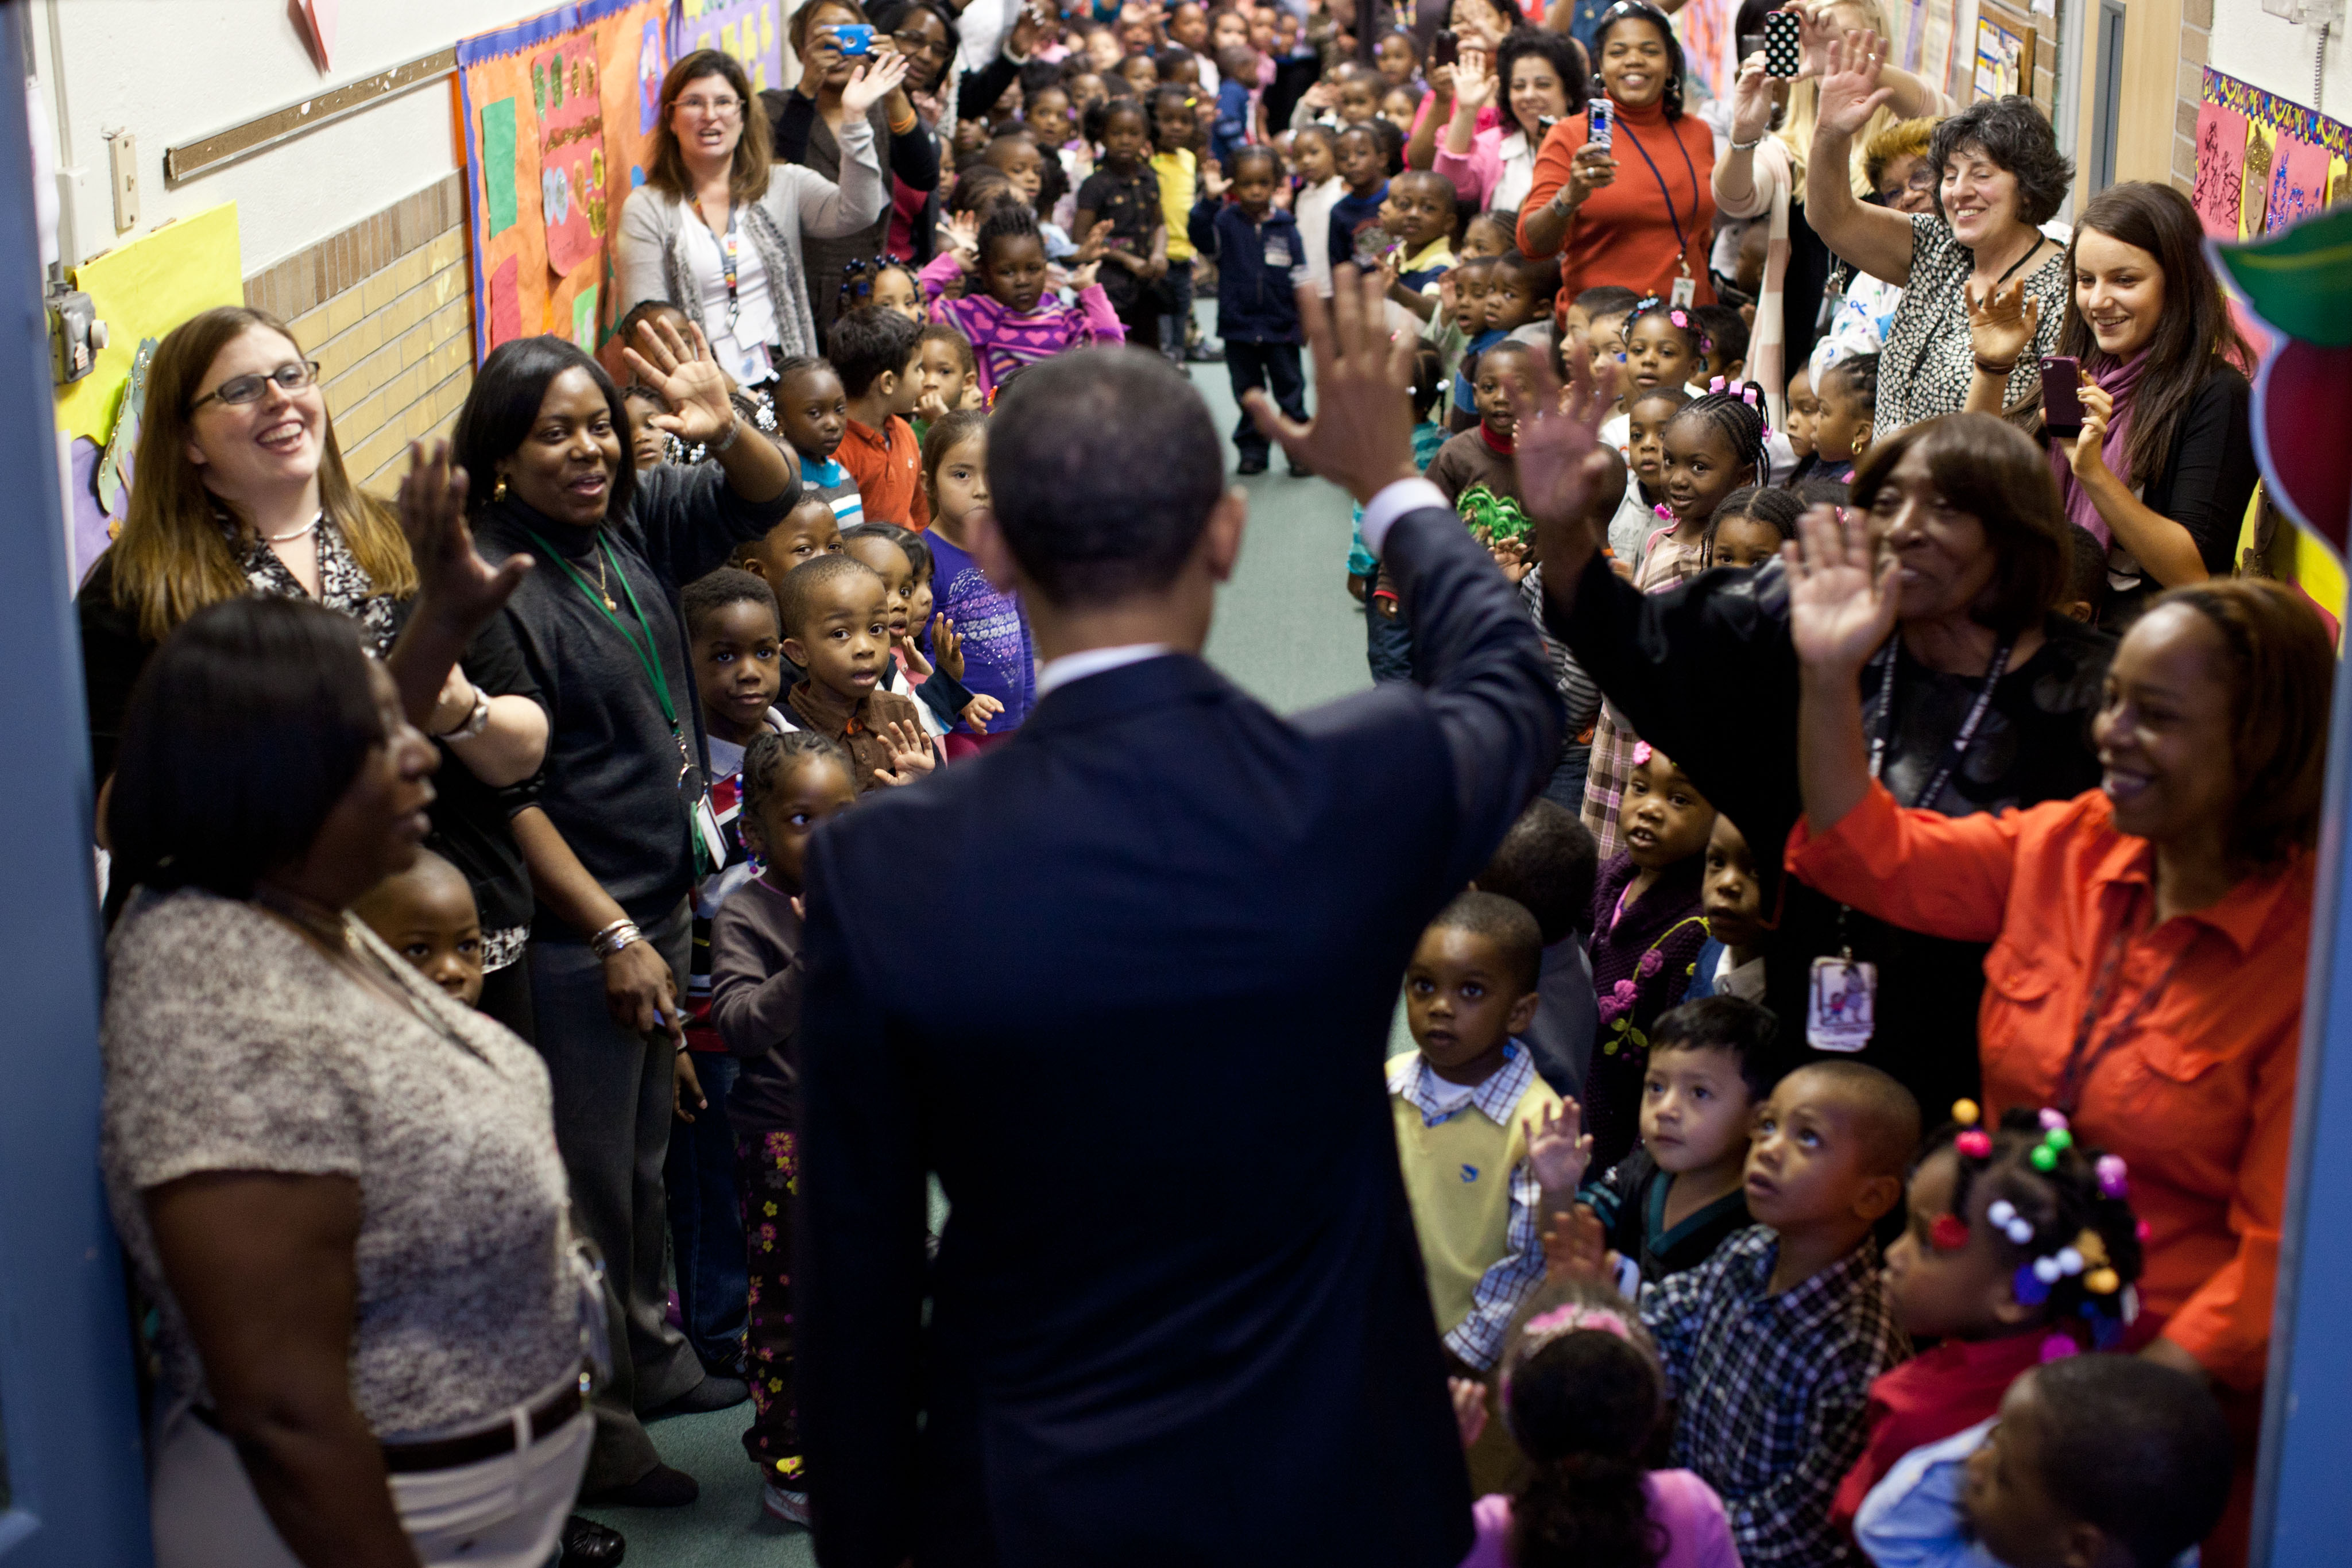 President Obama says goodbye to students after a visit to the Yeadon Regional Head Start Center